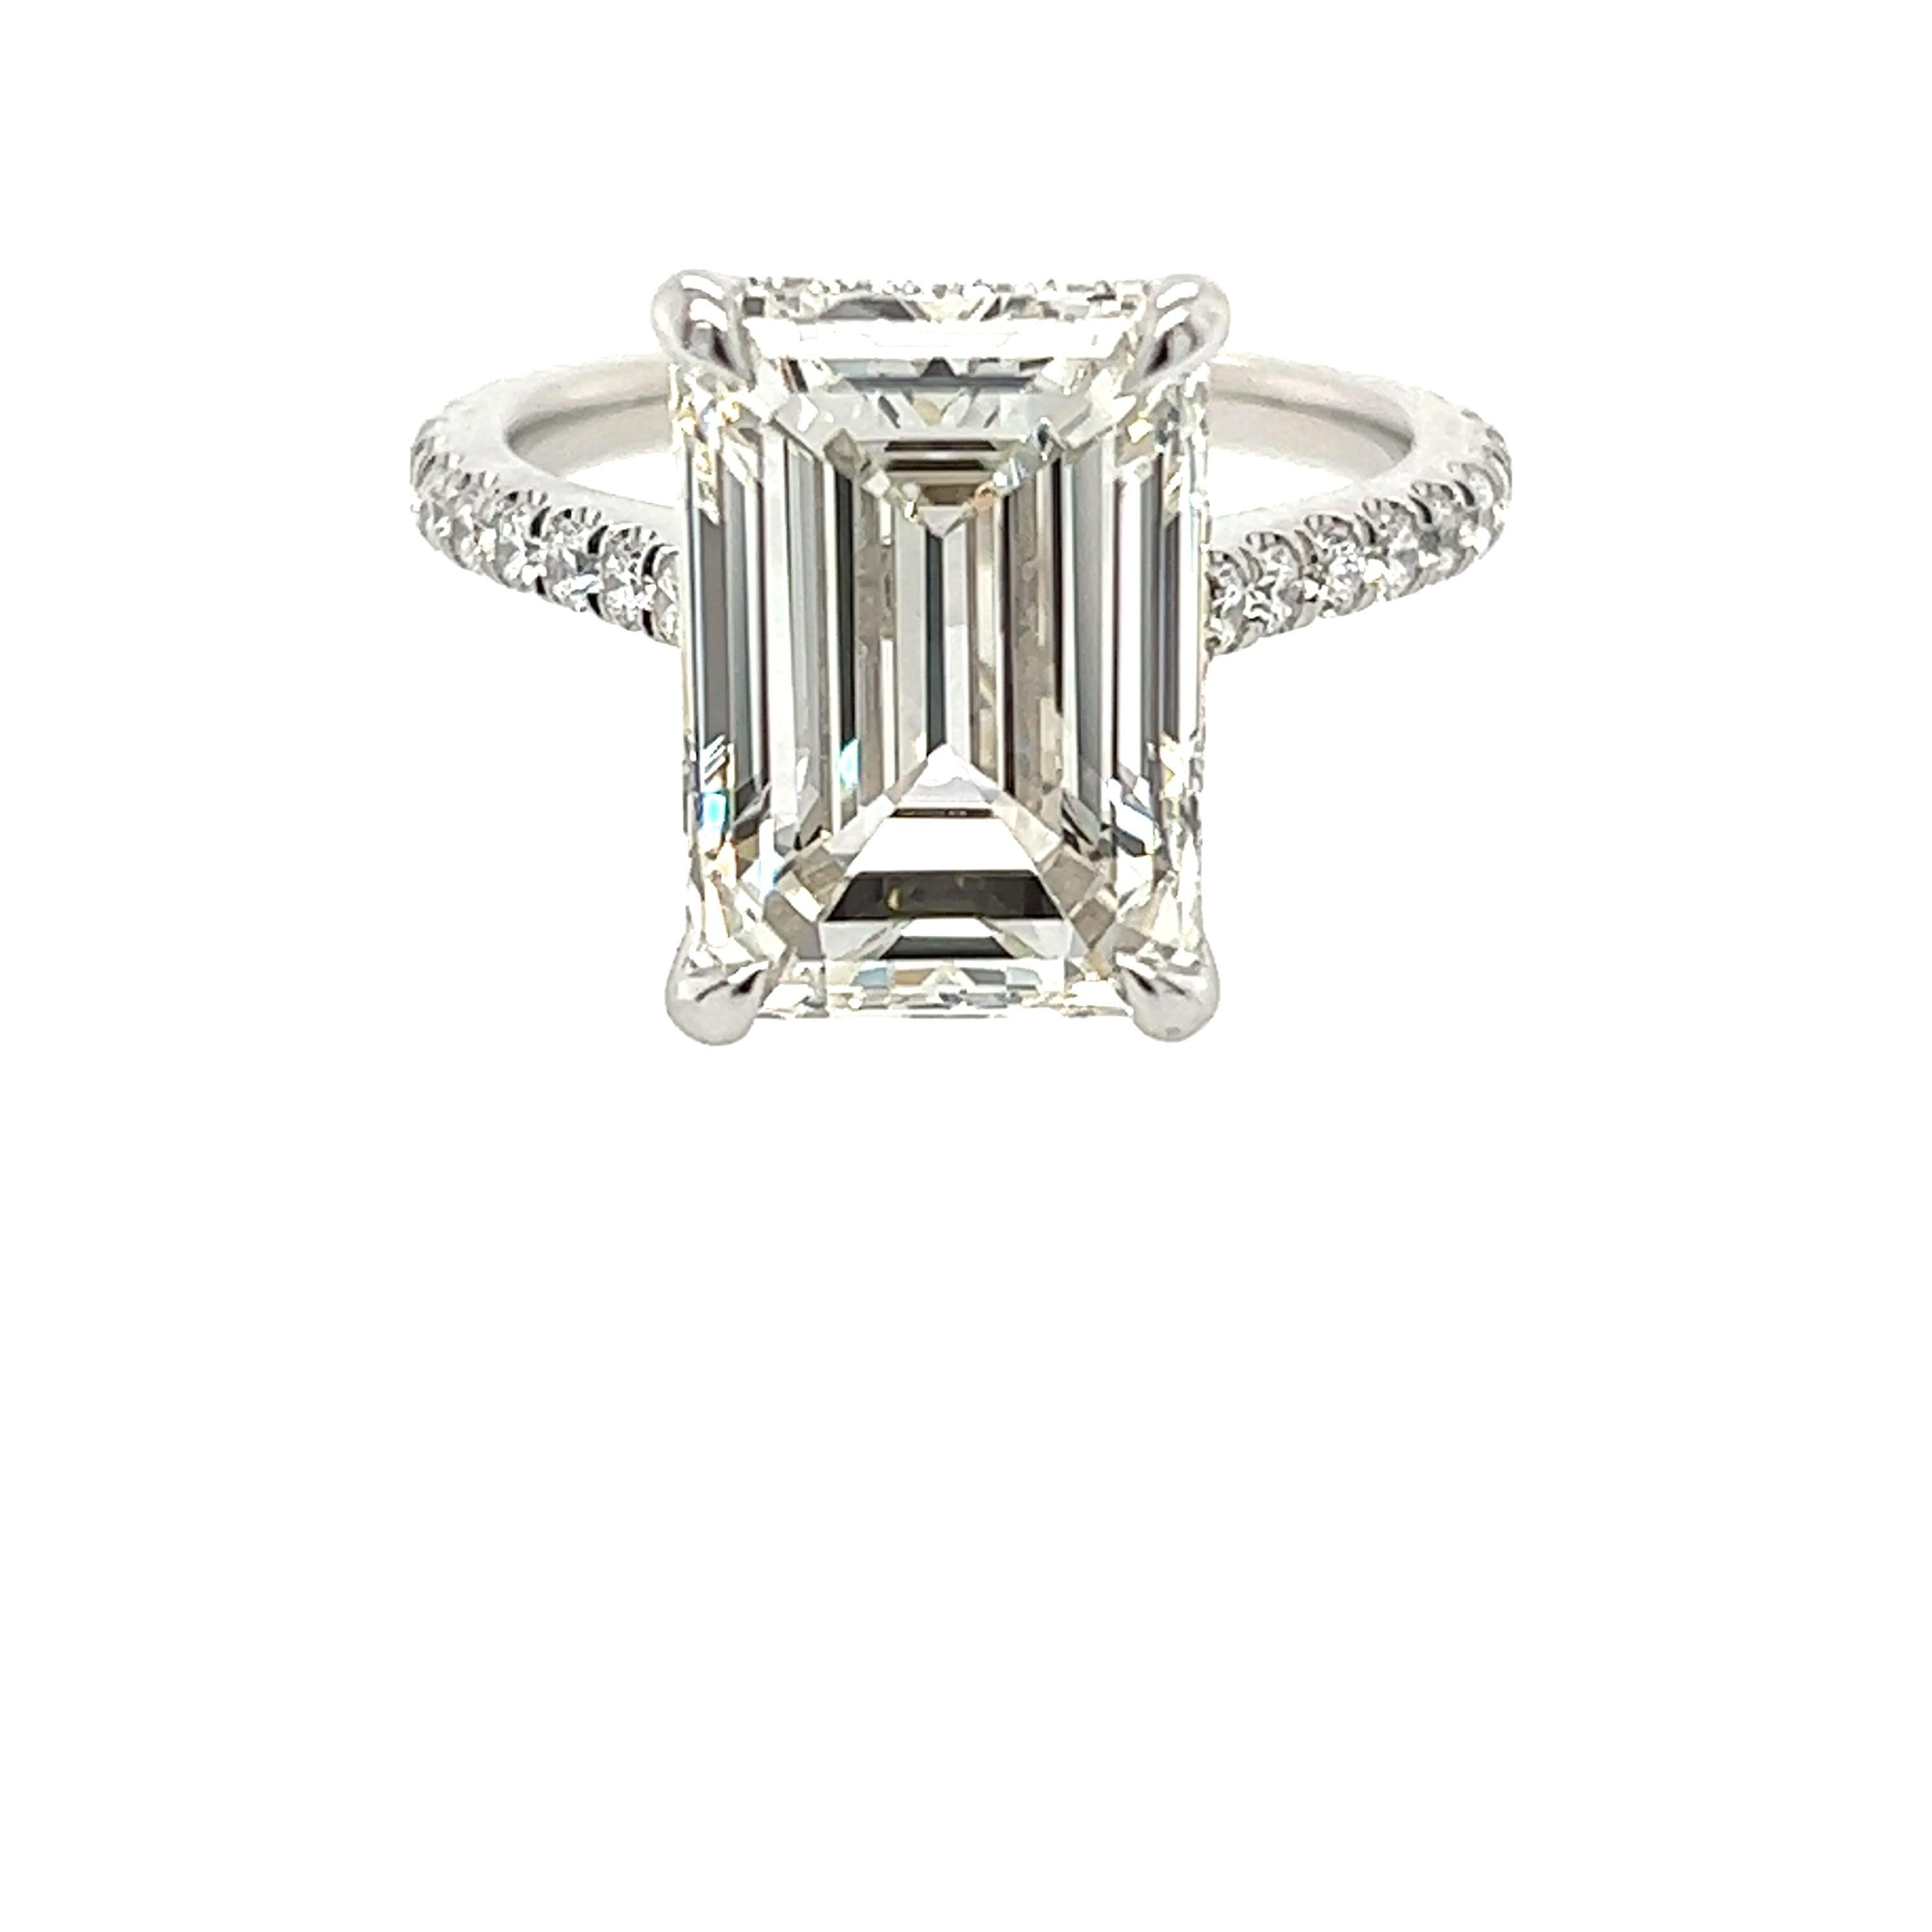 Rosenberg Diamonds & Co. 6.02 carat Emerald cut I color VS1 clarity is accompanied by a GIA certificate. This gorgeous Emerald is full of brilliance and it is set in a handmade platinum setting and continues its elegance with a row of micro pave